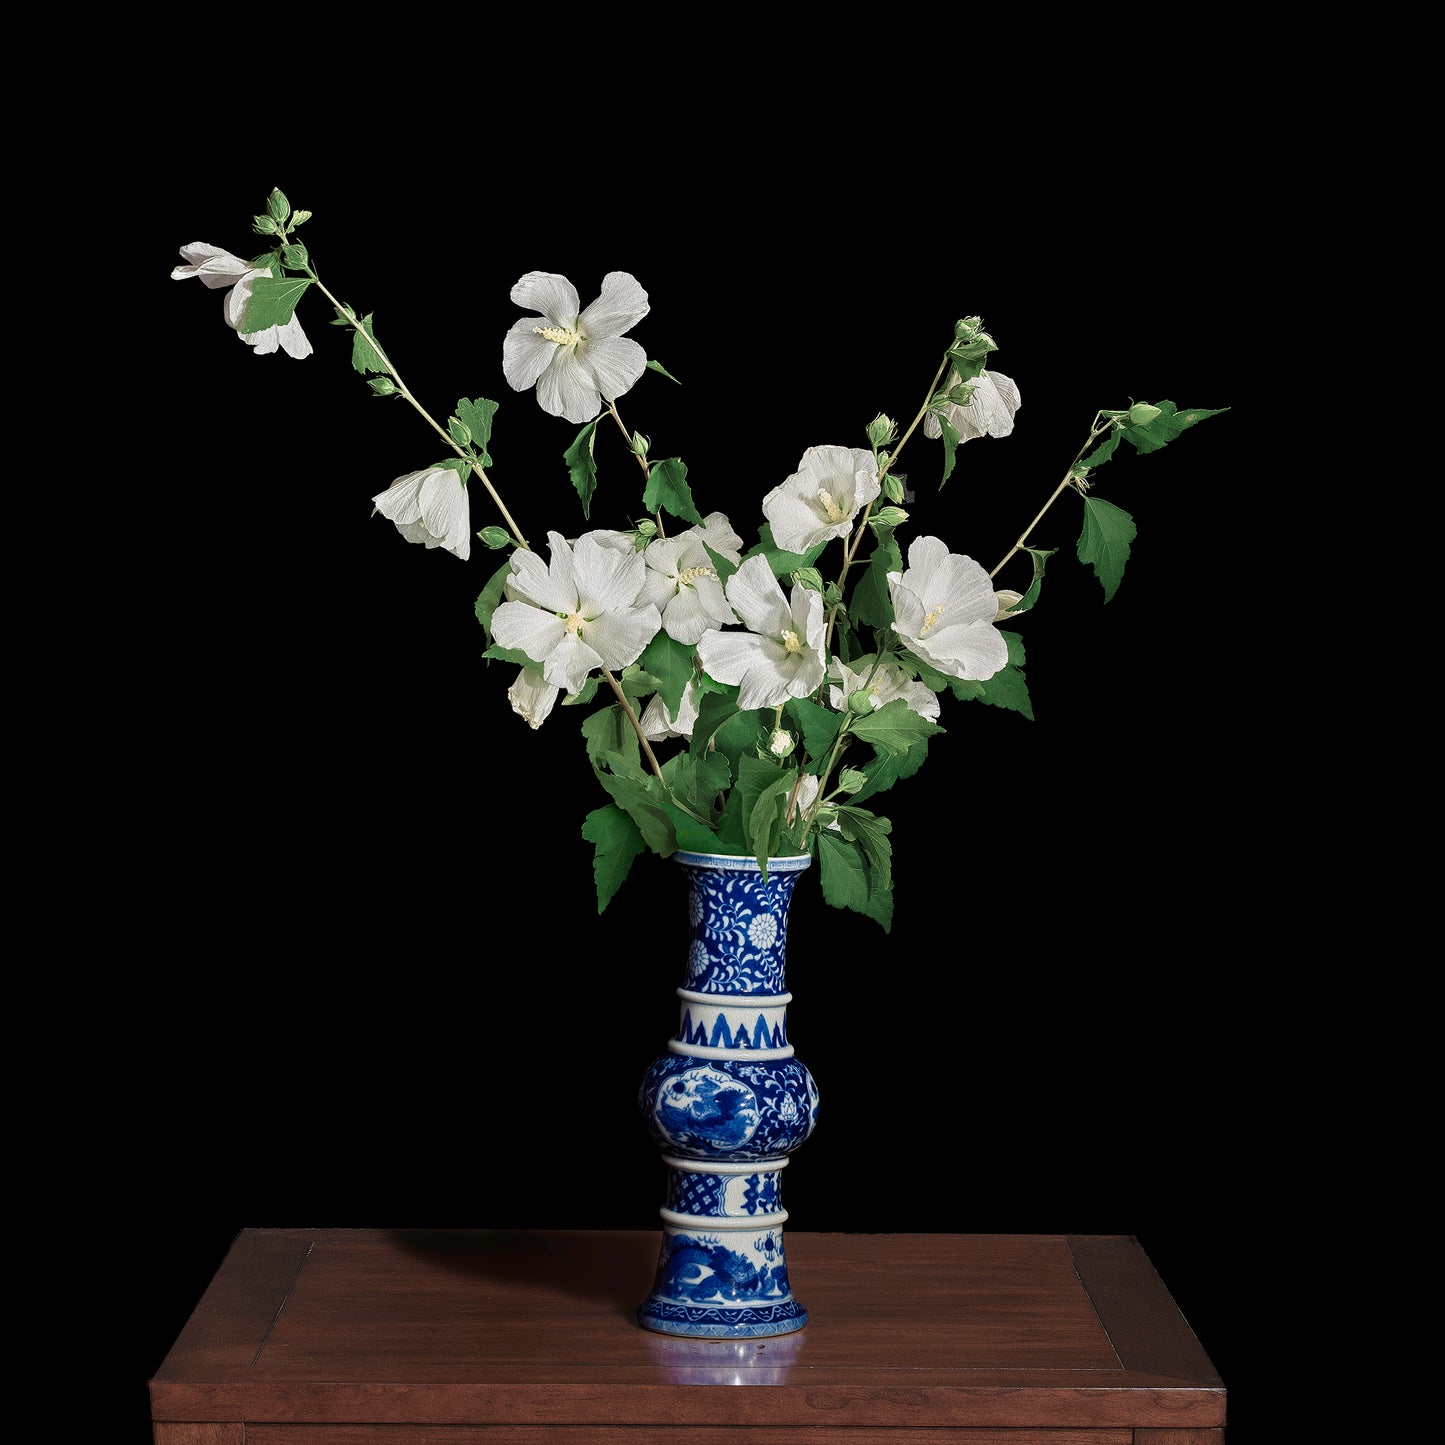 White Rose of Sharon in a Blue and White Chinese Vase